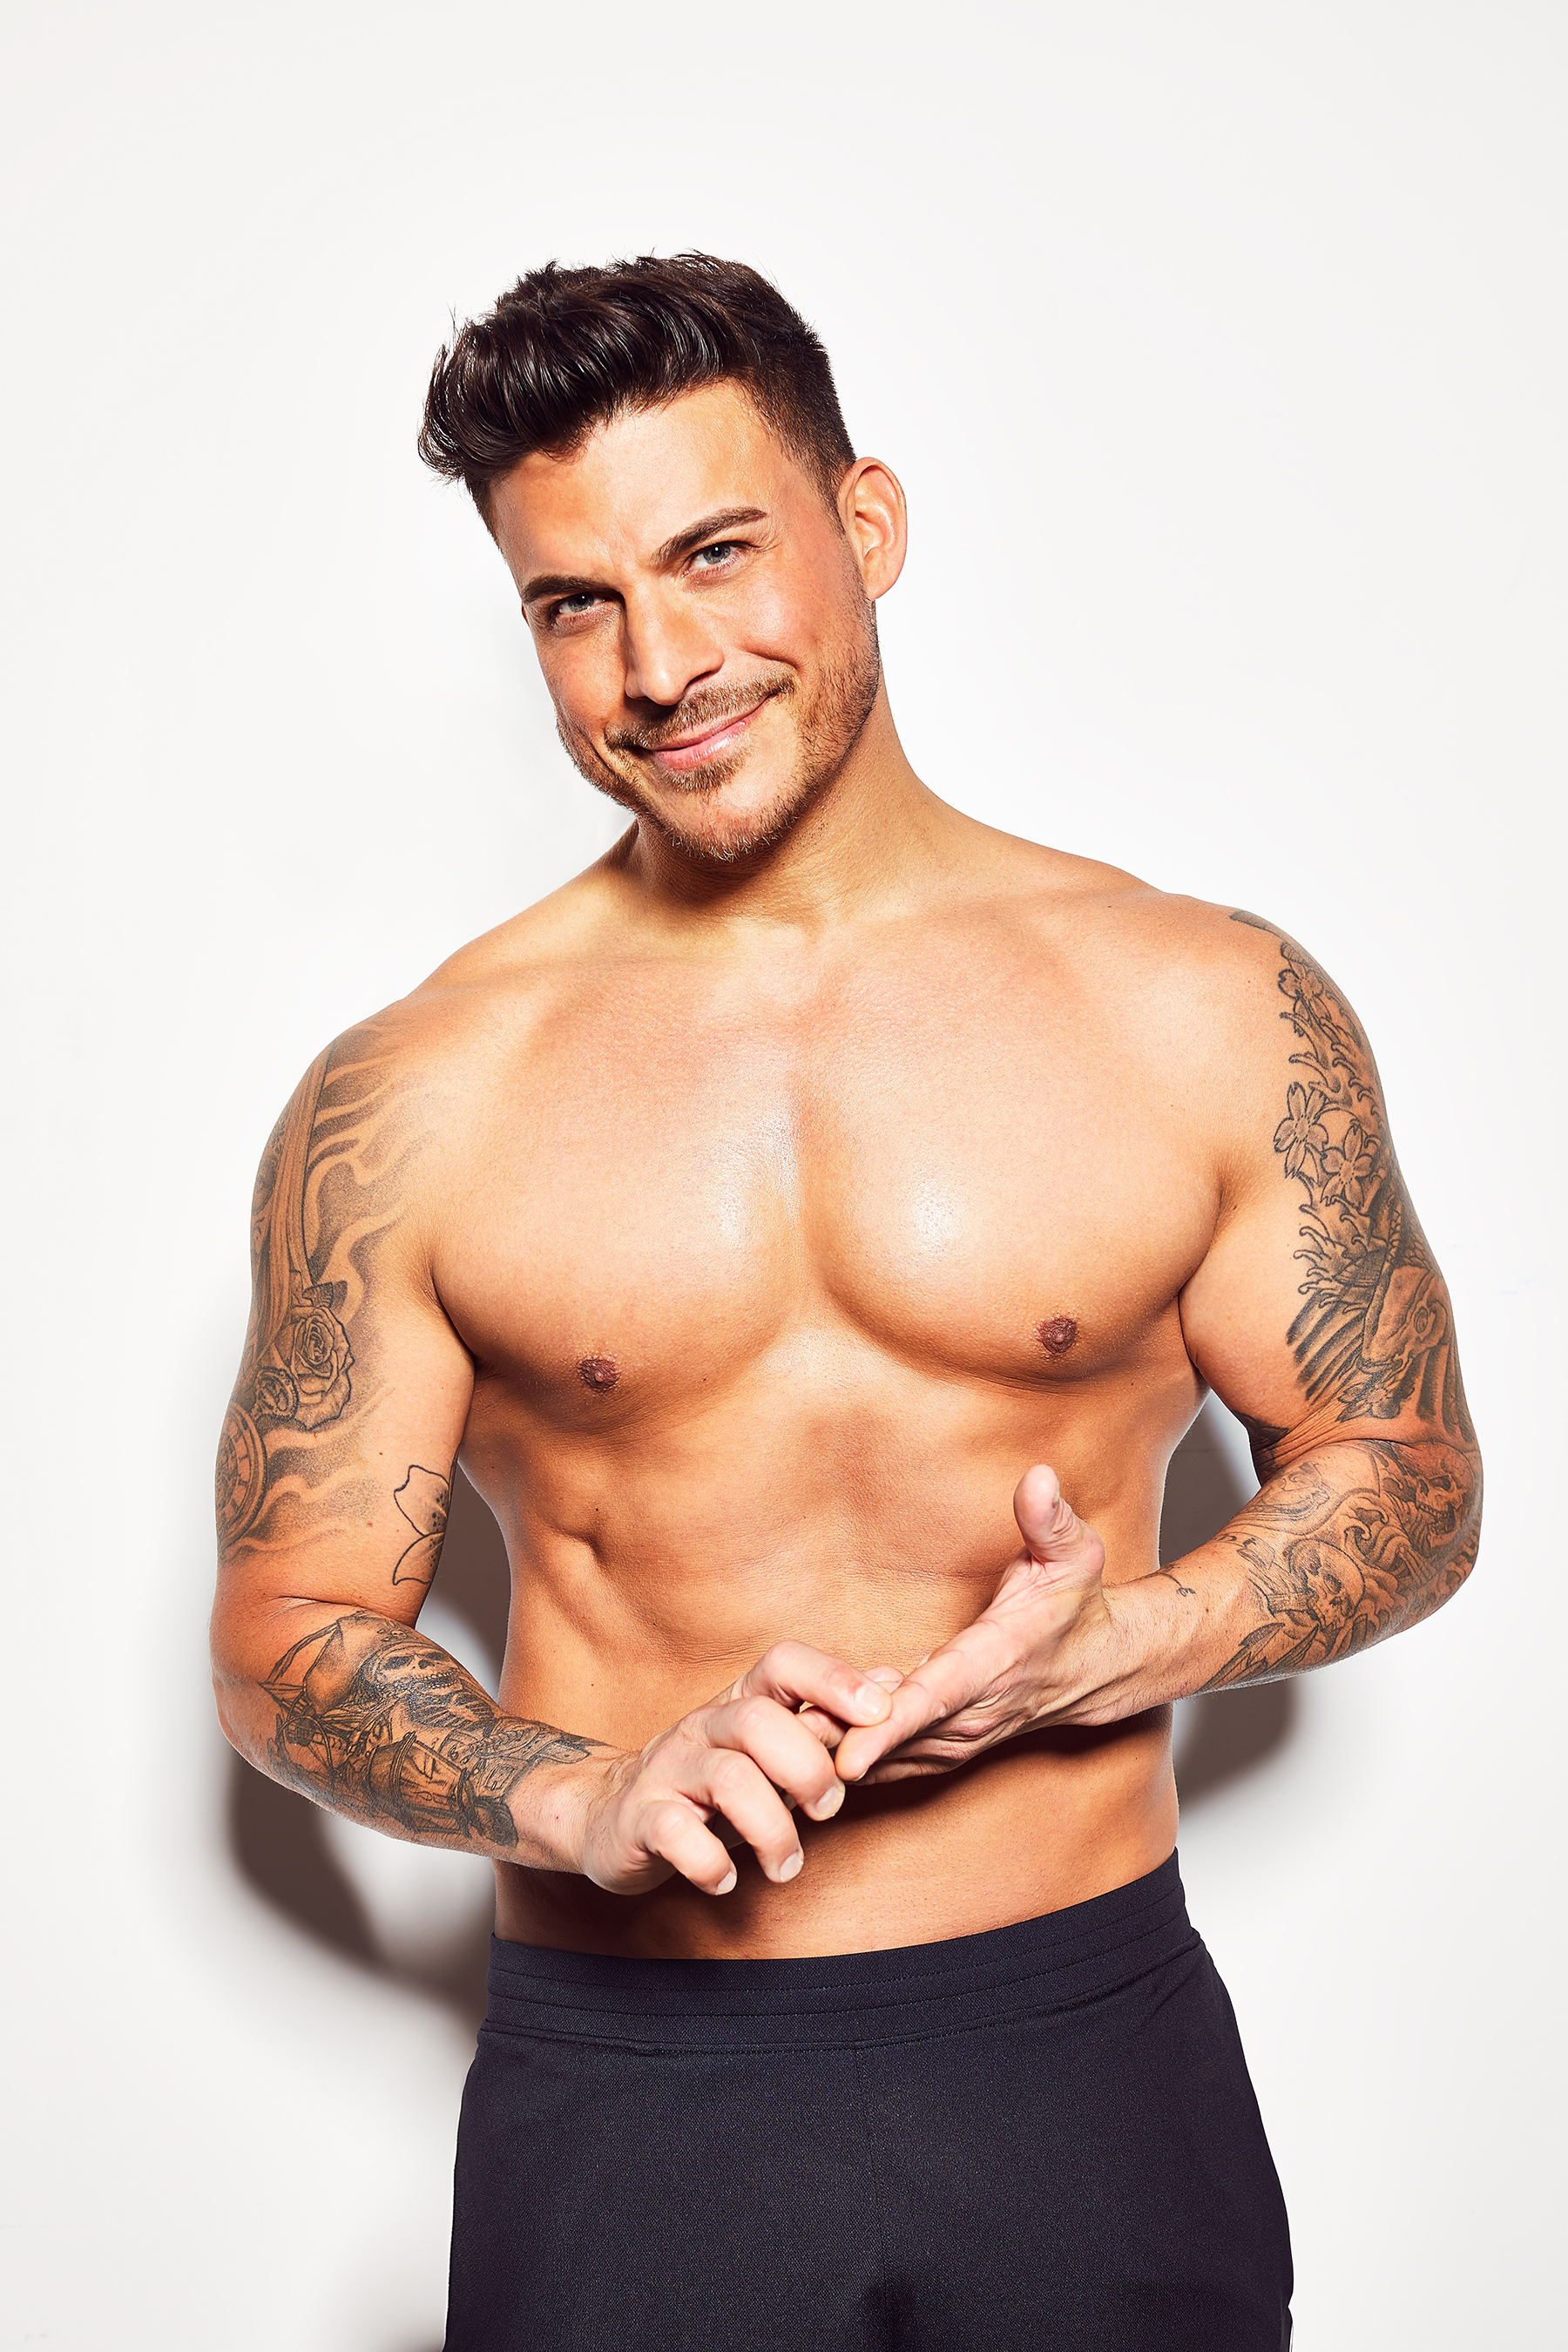 bre herman recommends jax taylor naked pic